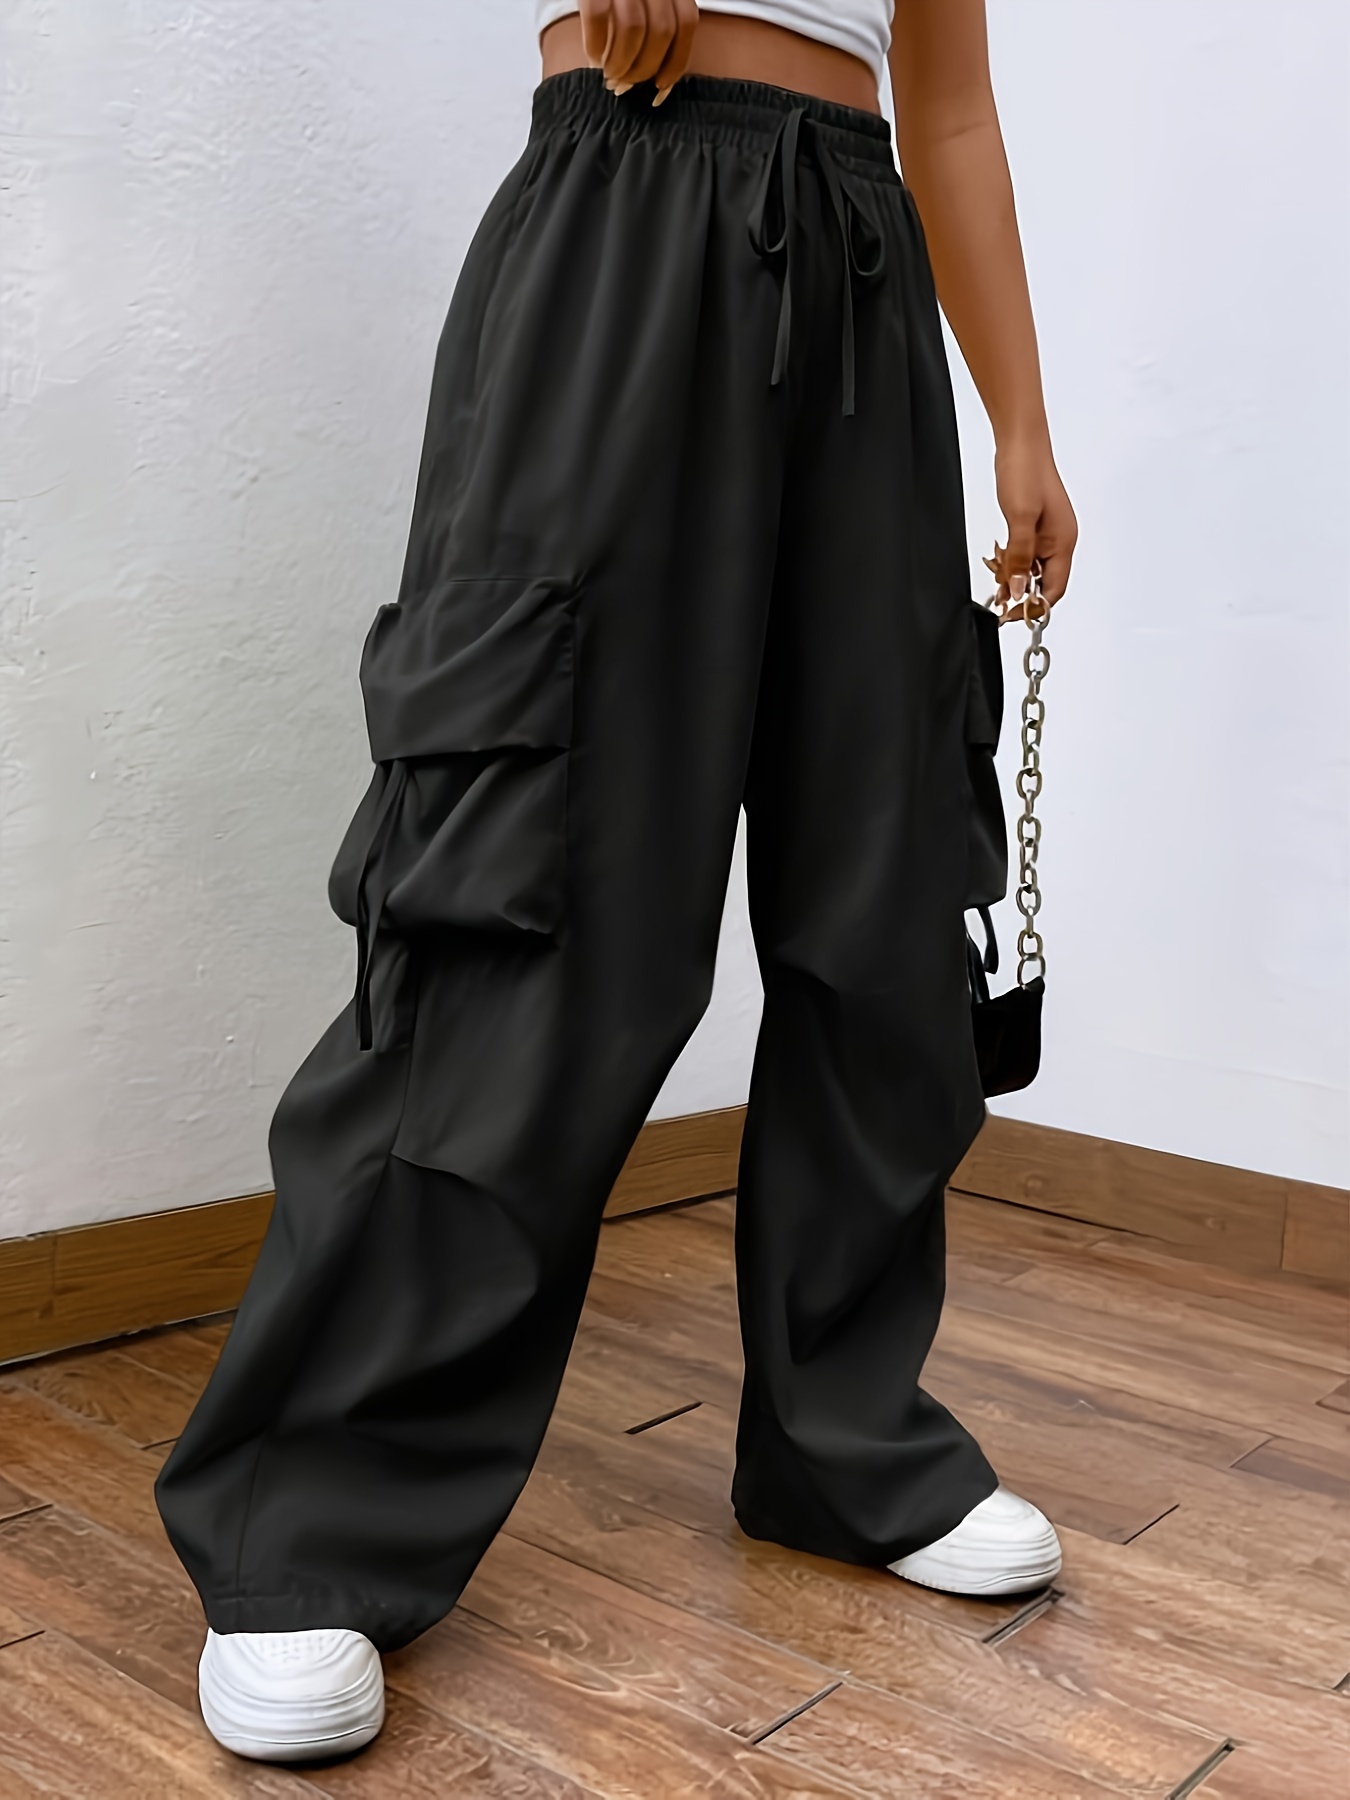  Cargo Pants for Women Baggy,Low Waist Drawstring Wide Leg  Parachute Pants Vintage Hip Hop Baggy Relaxed Joggers Sweatpants Trousers  with Pockets Black XS : Clothing, Shoes & Jewelry